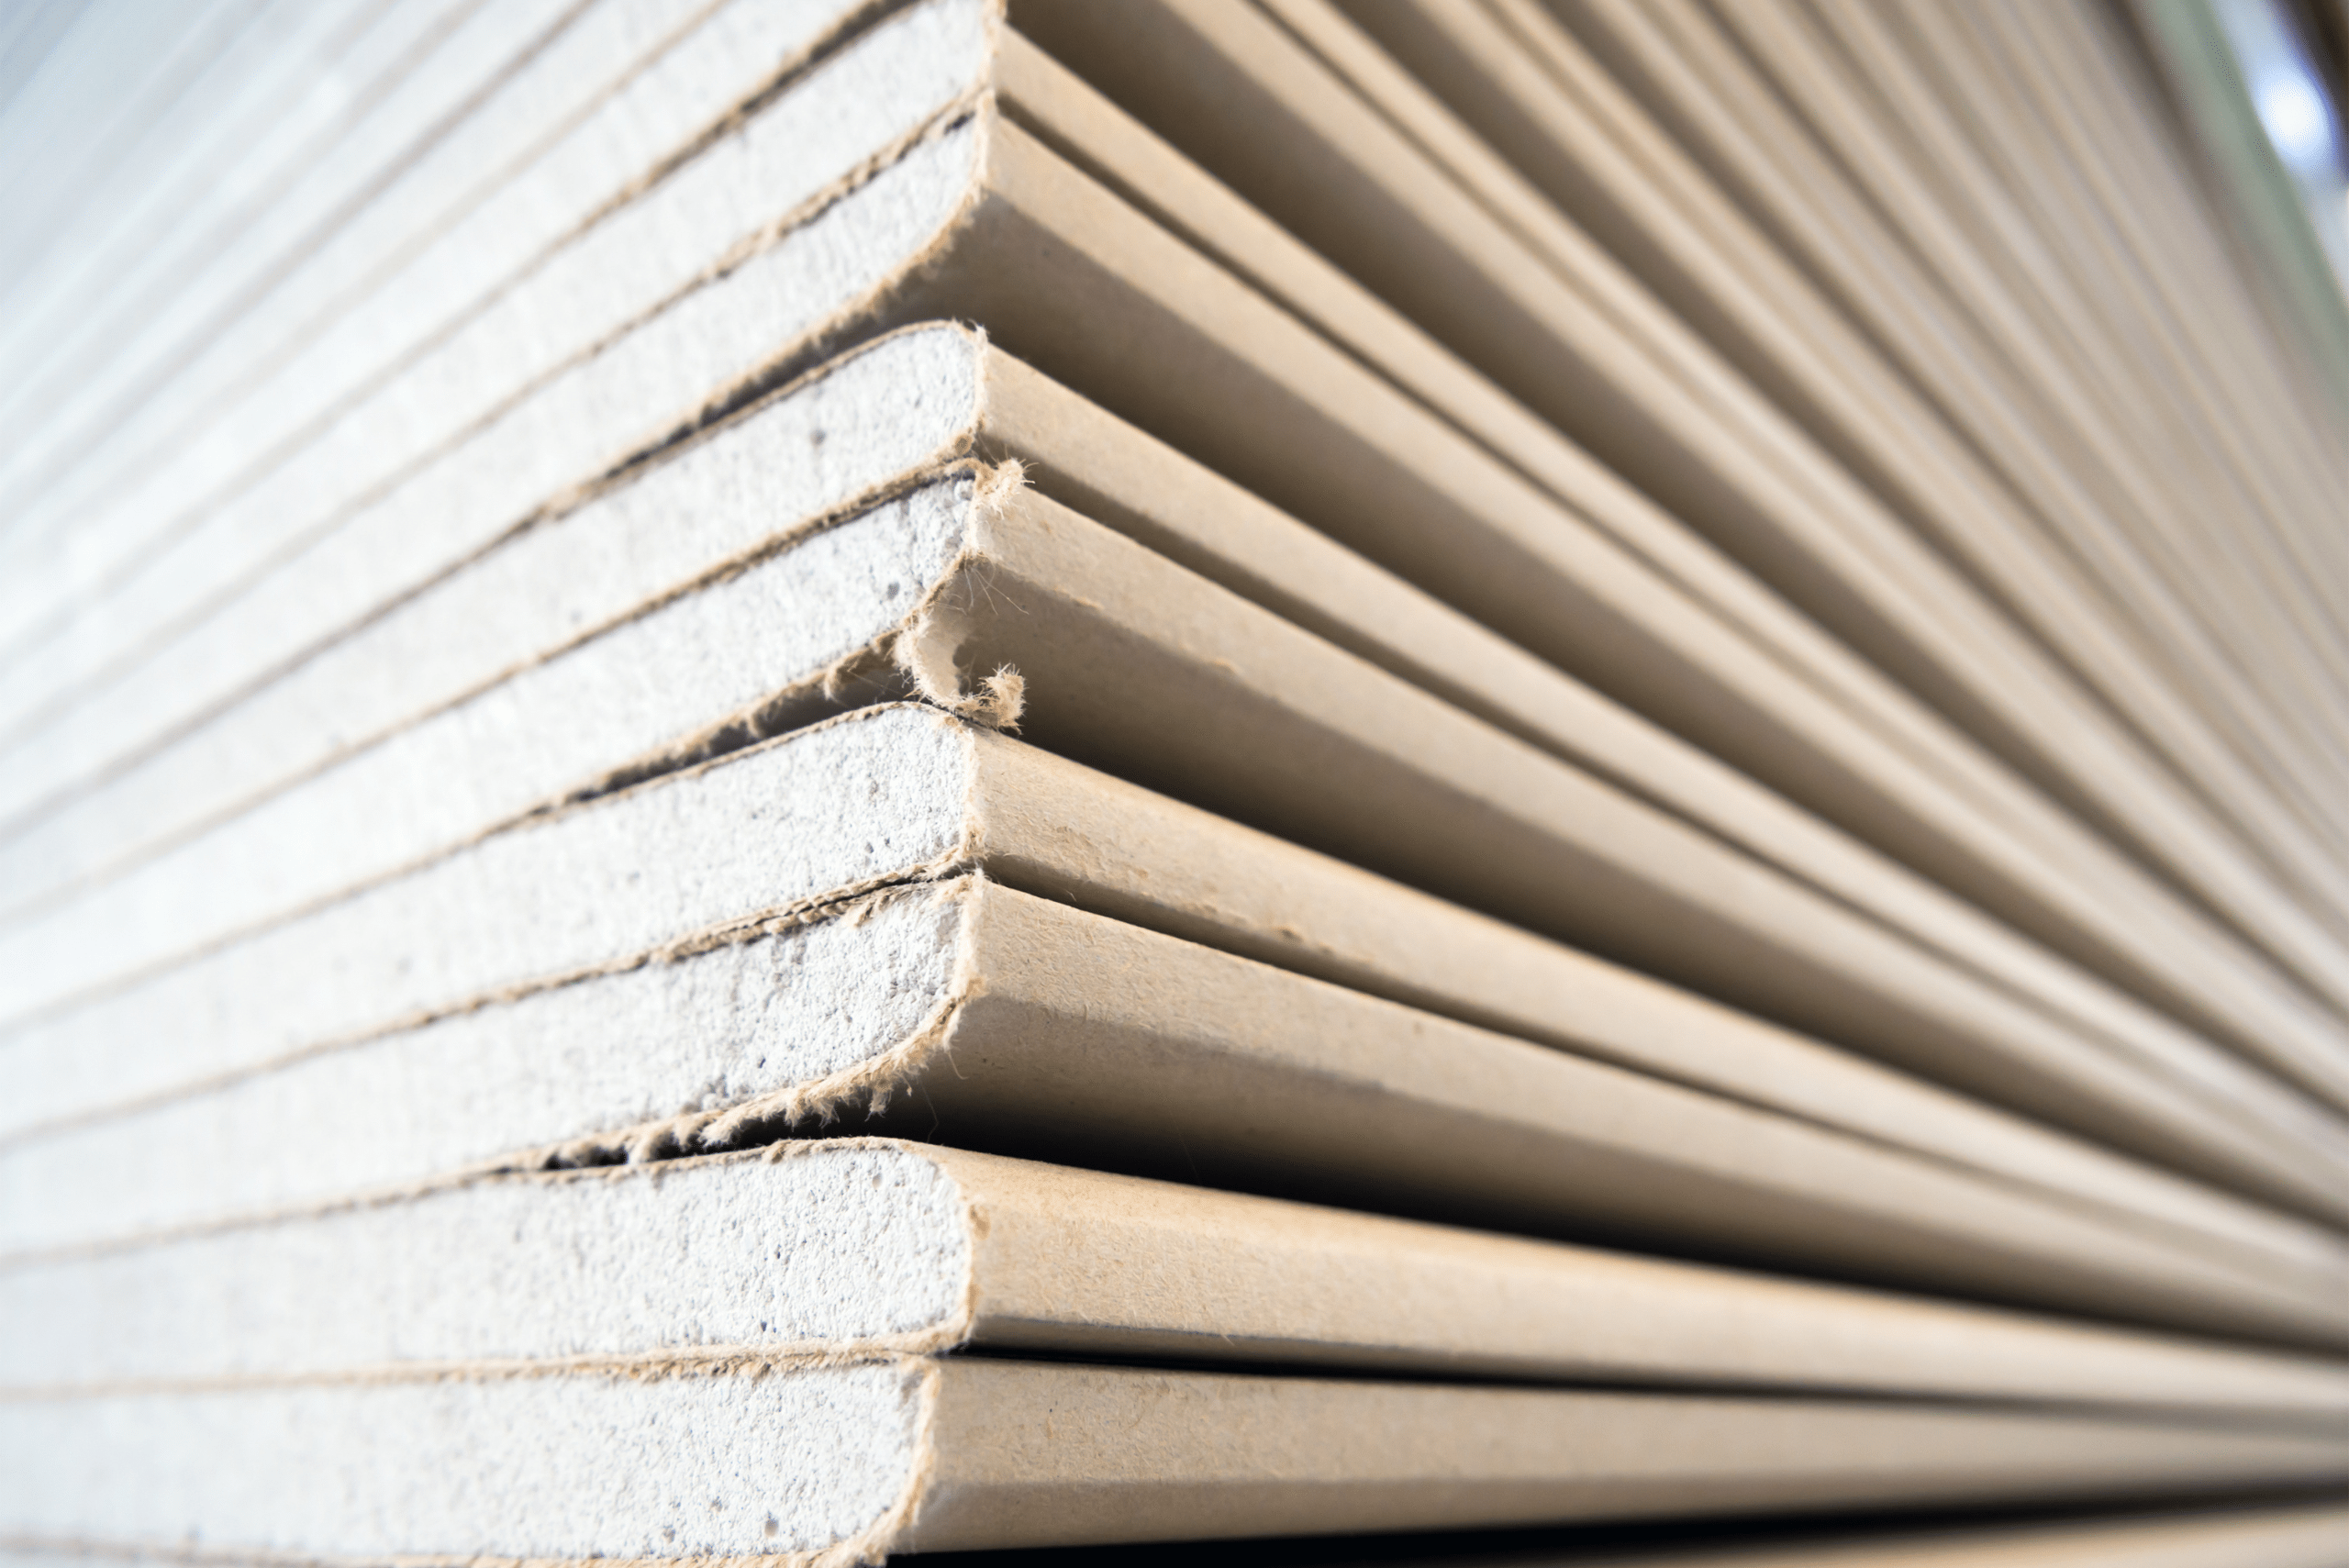 A stock of drywall sheets